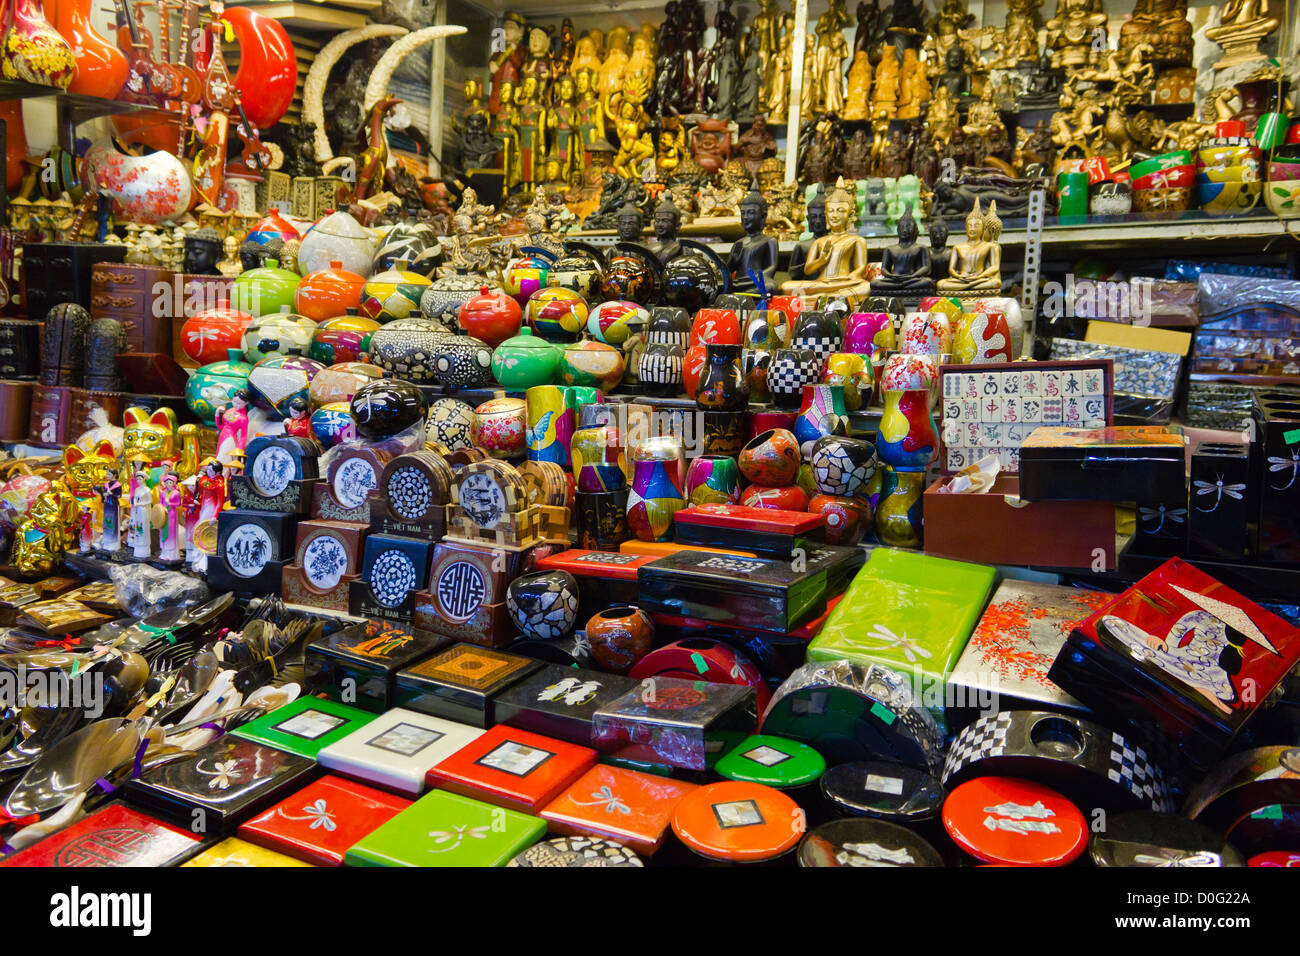 Souvenirs for sale in Ben Thanh Market in Ho Chi Minh City (Saigon) in Vietnam Stock Photo